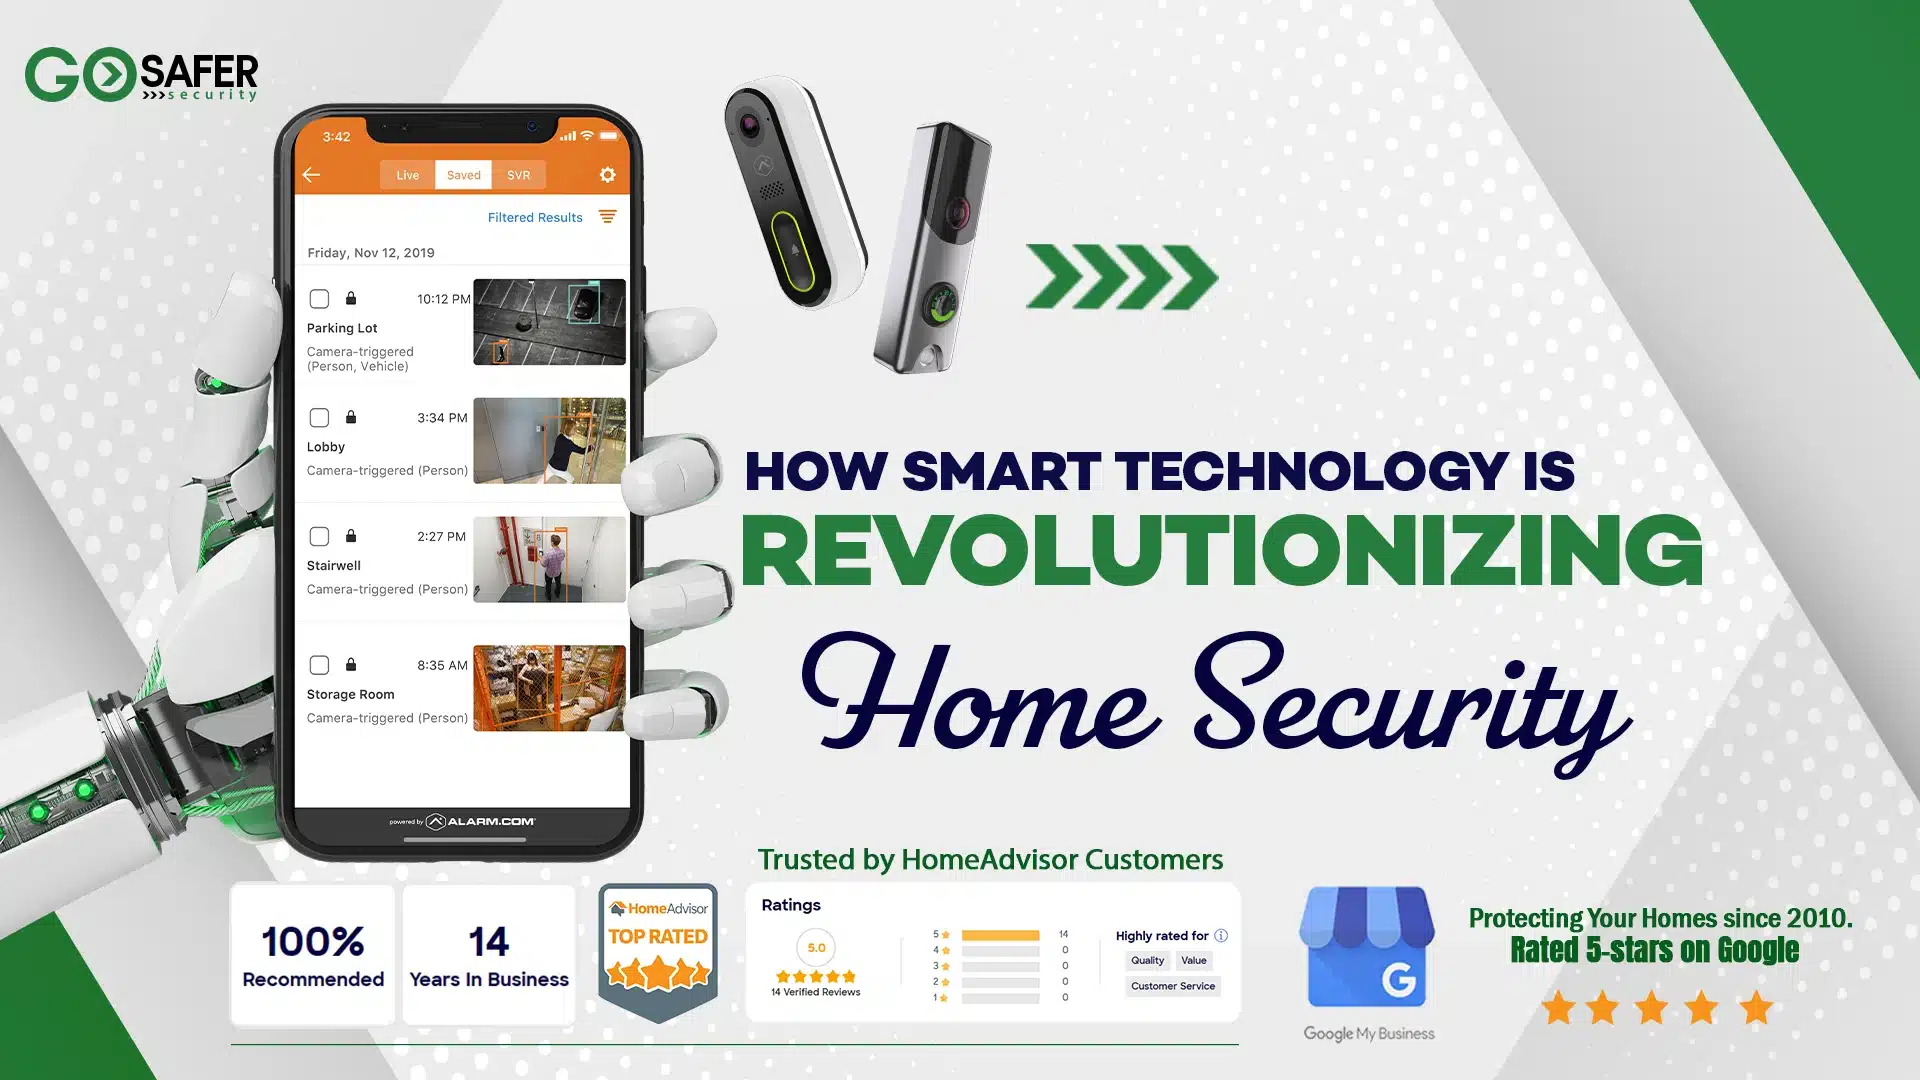 How Smart Technology is Revolutionizing Home Security